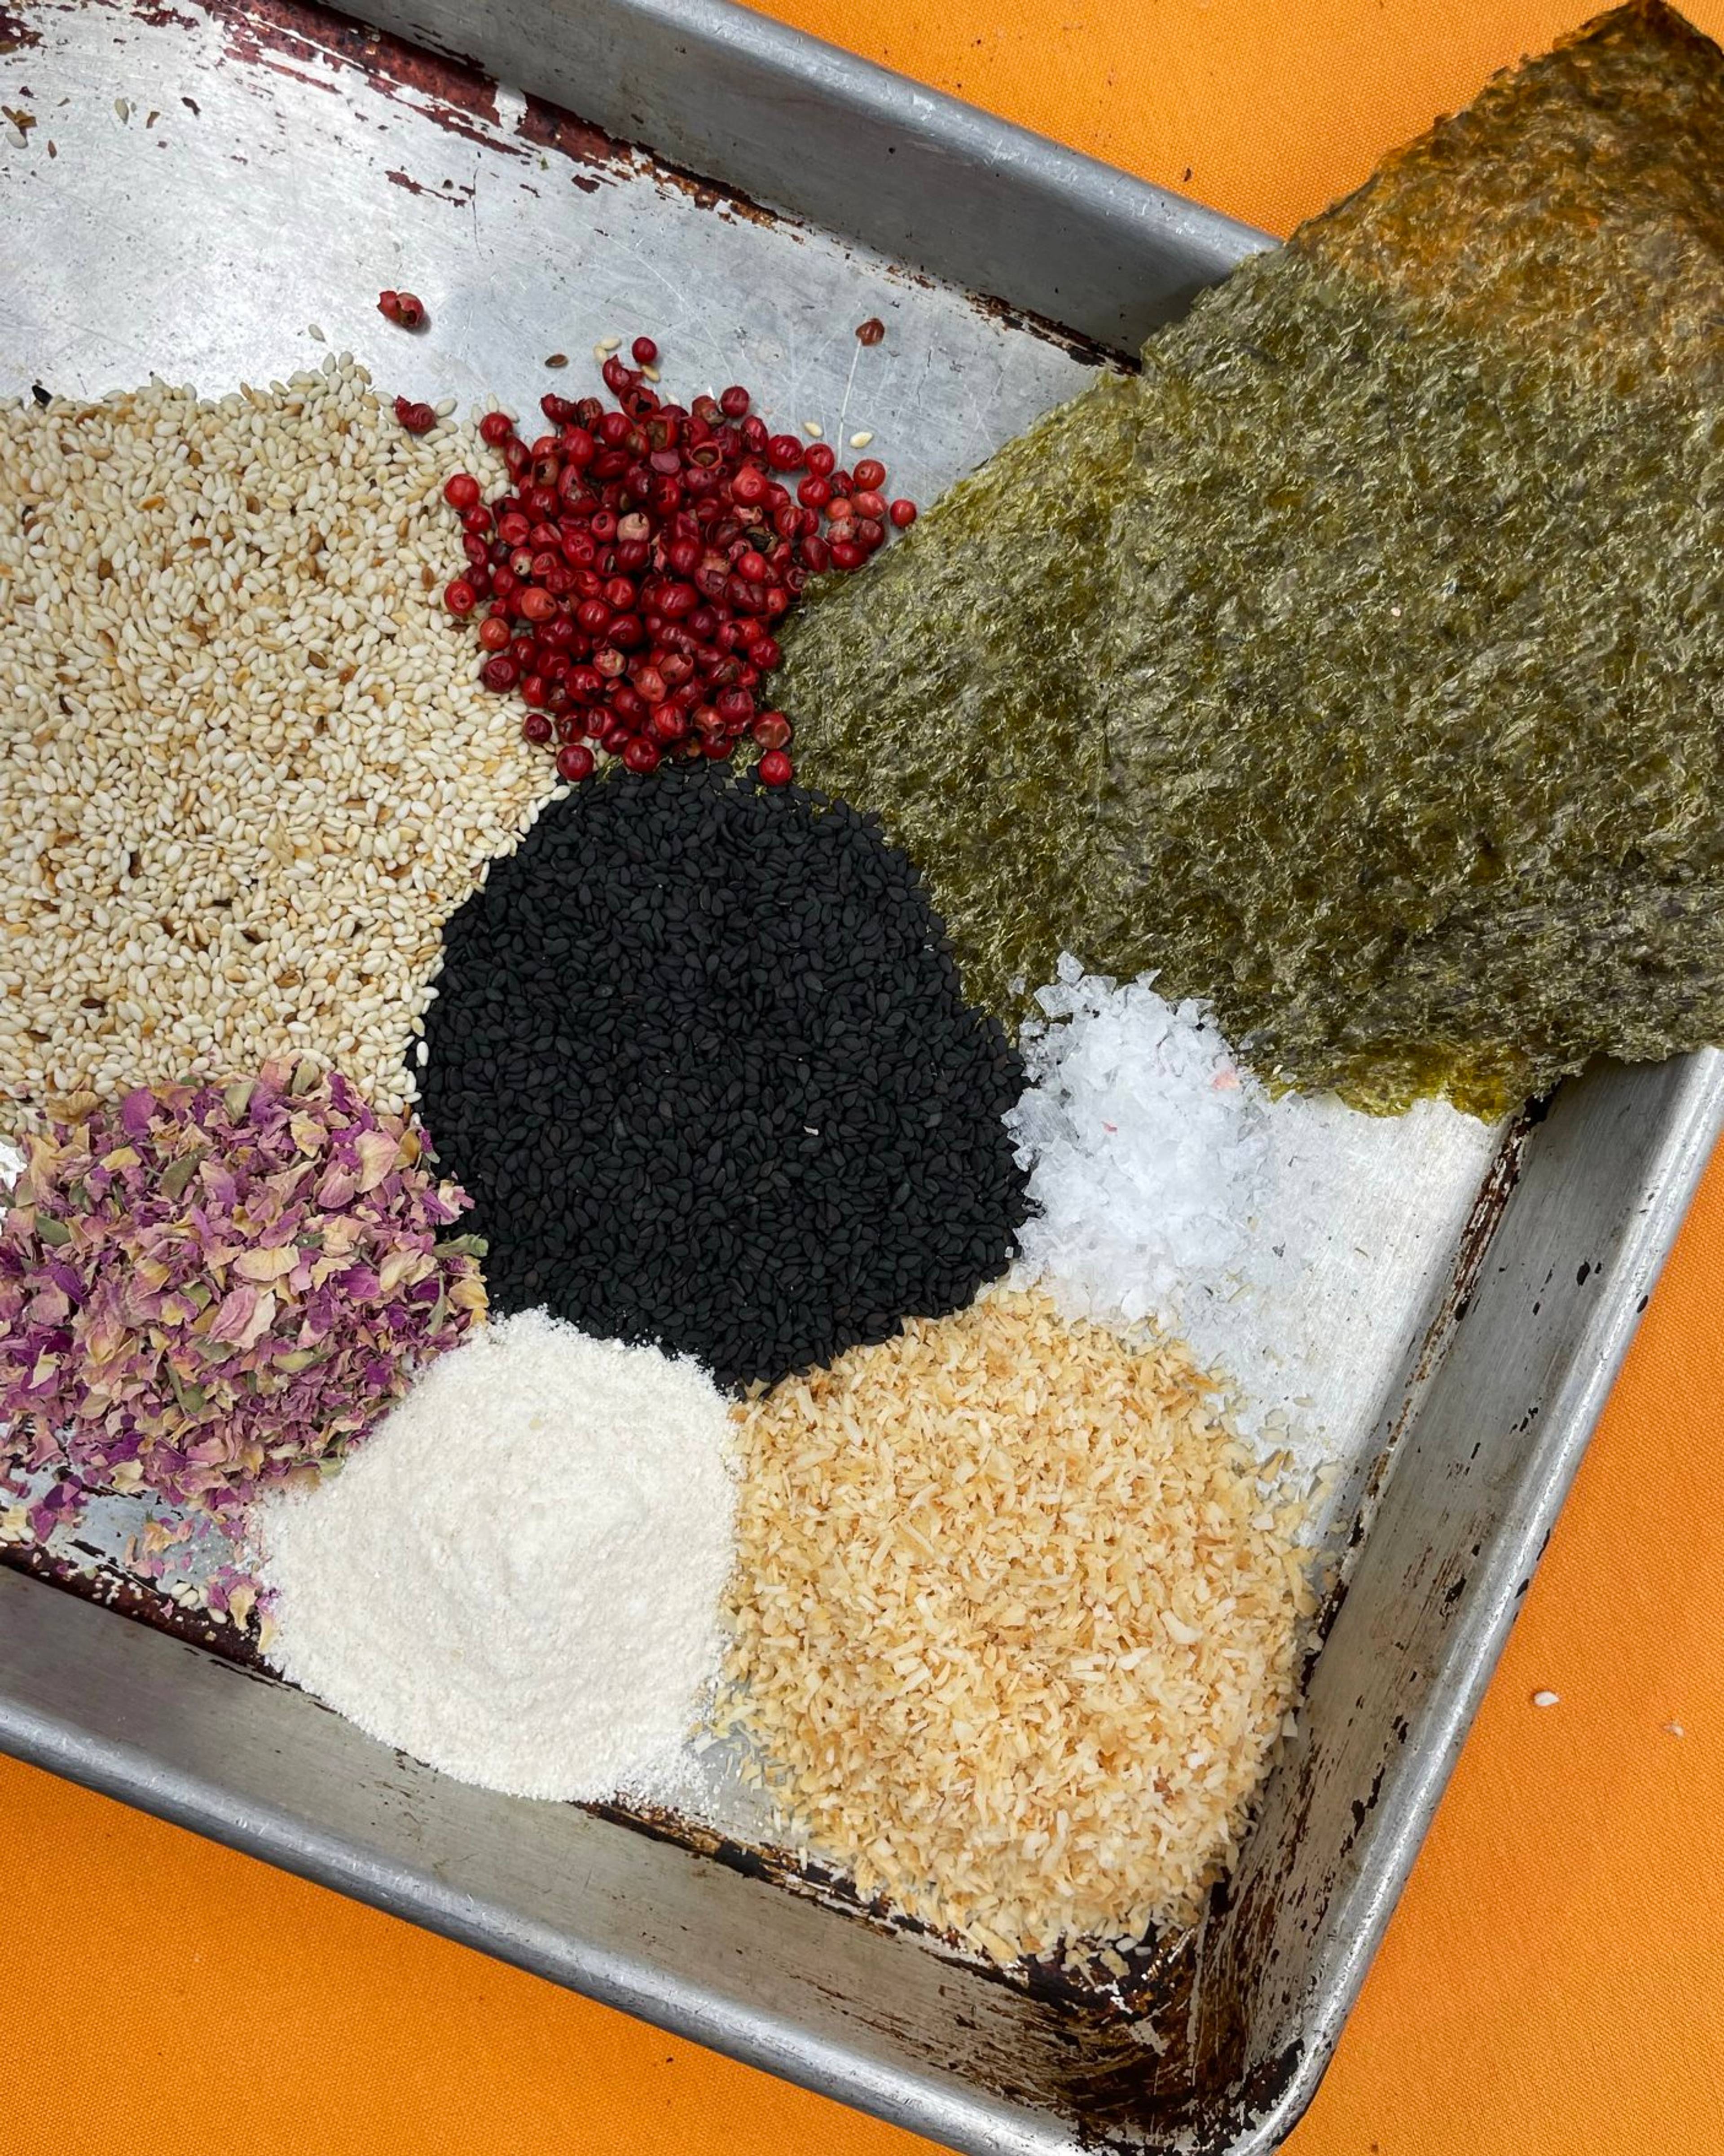 spices in piles on a baking tray